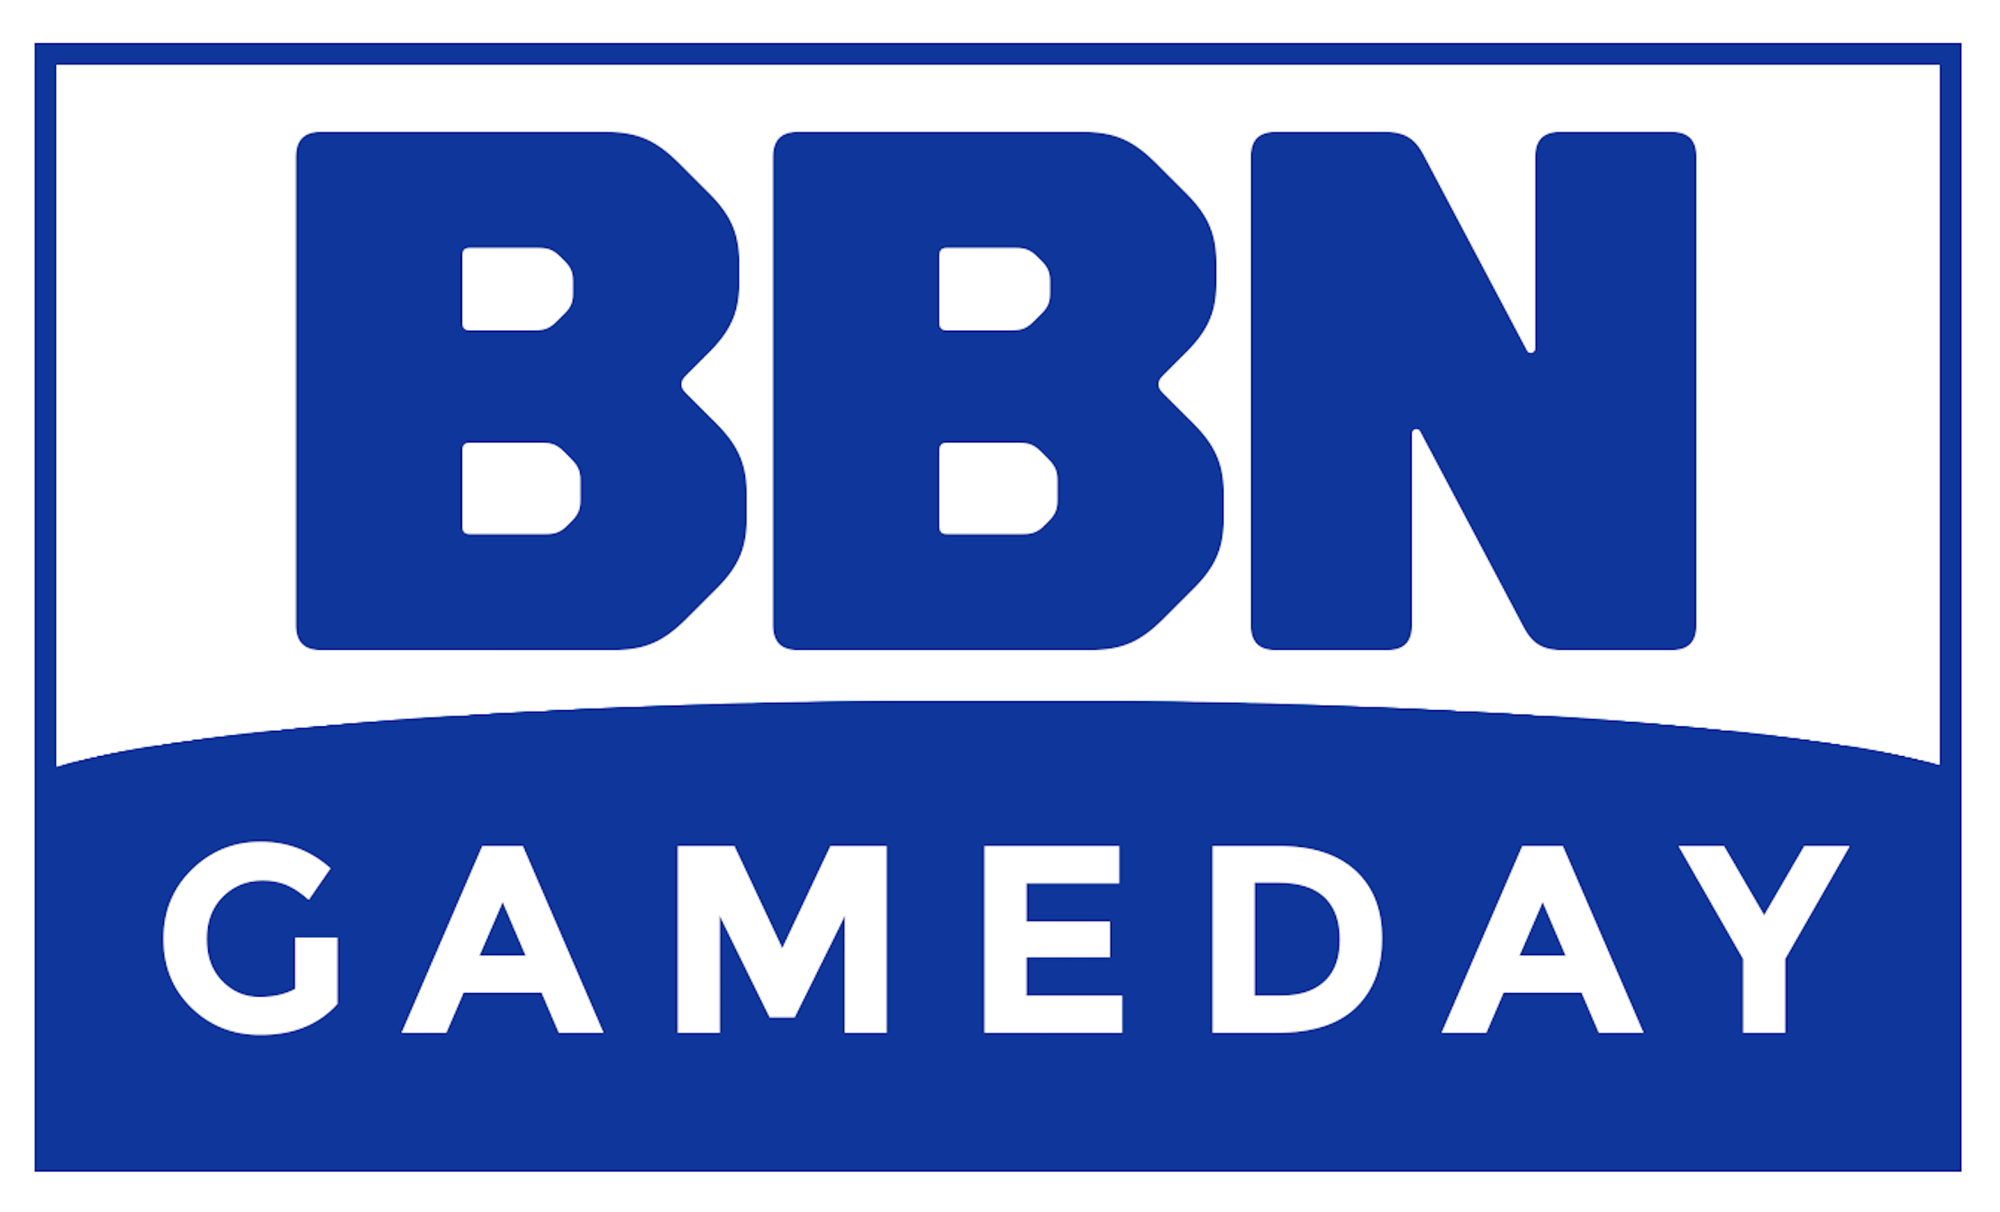 BBN Gameday January 22nd 2022